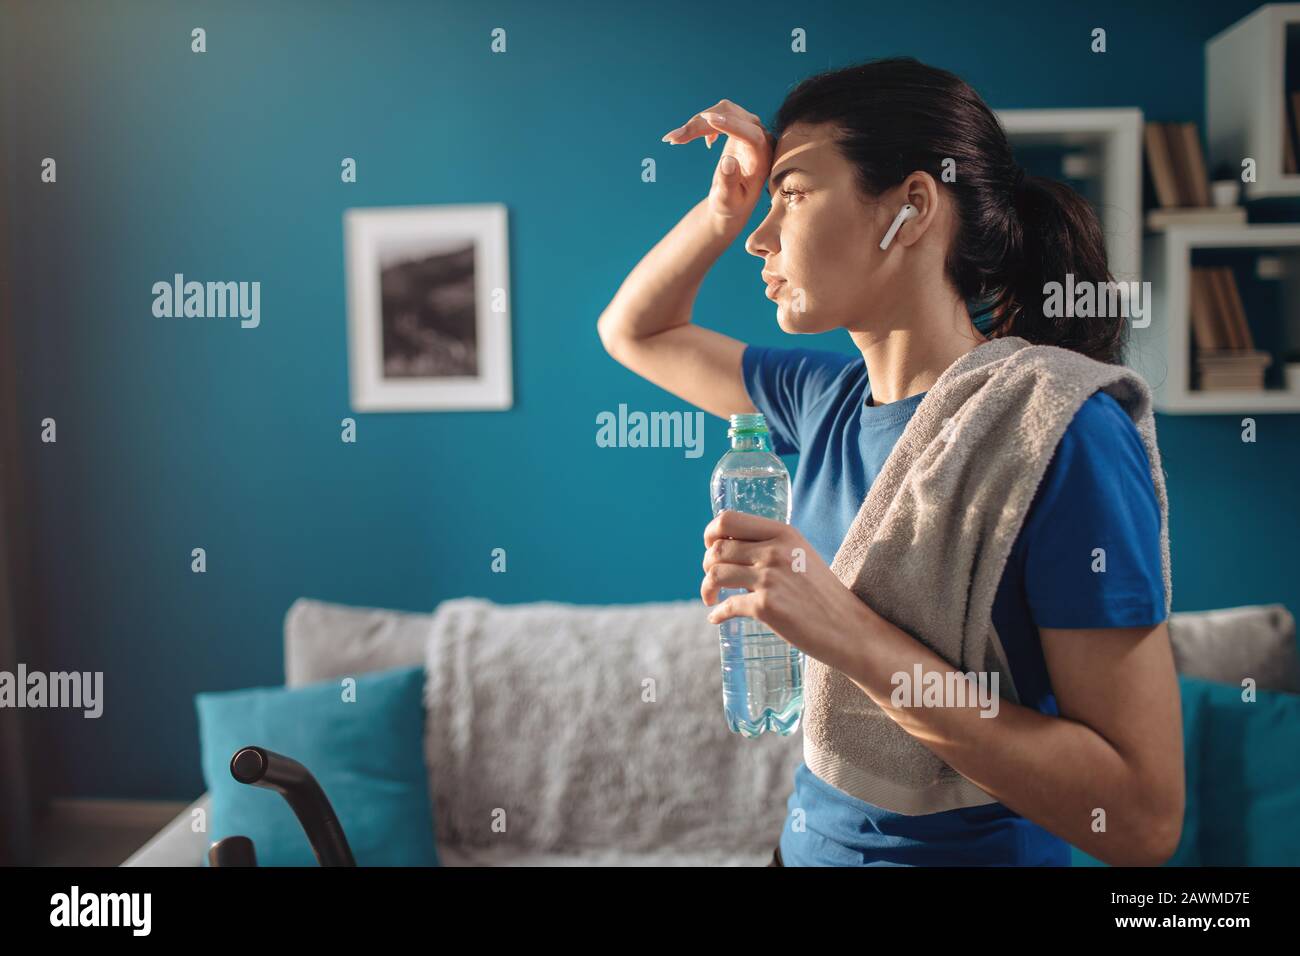 Cute Athletic Young Woman Wiping Her Sweaty Forehead Stock Photo